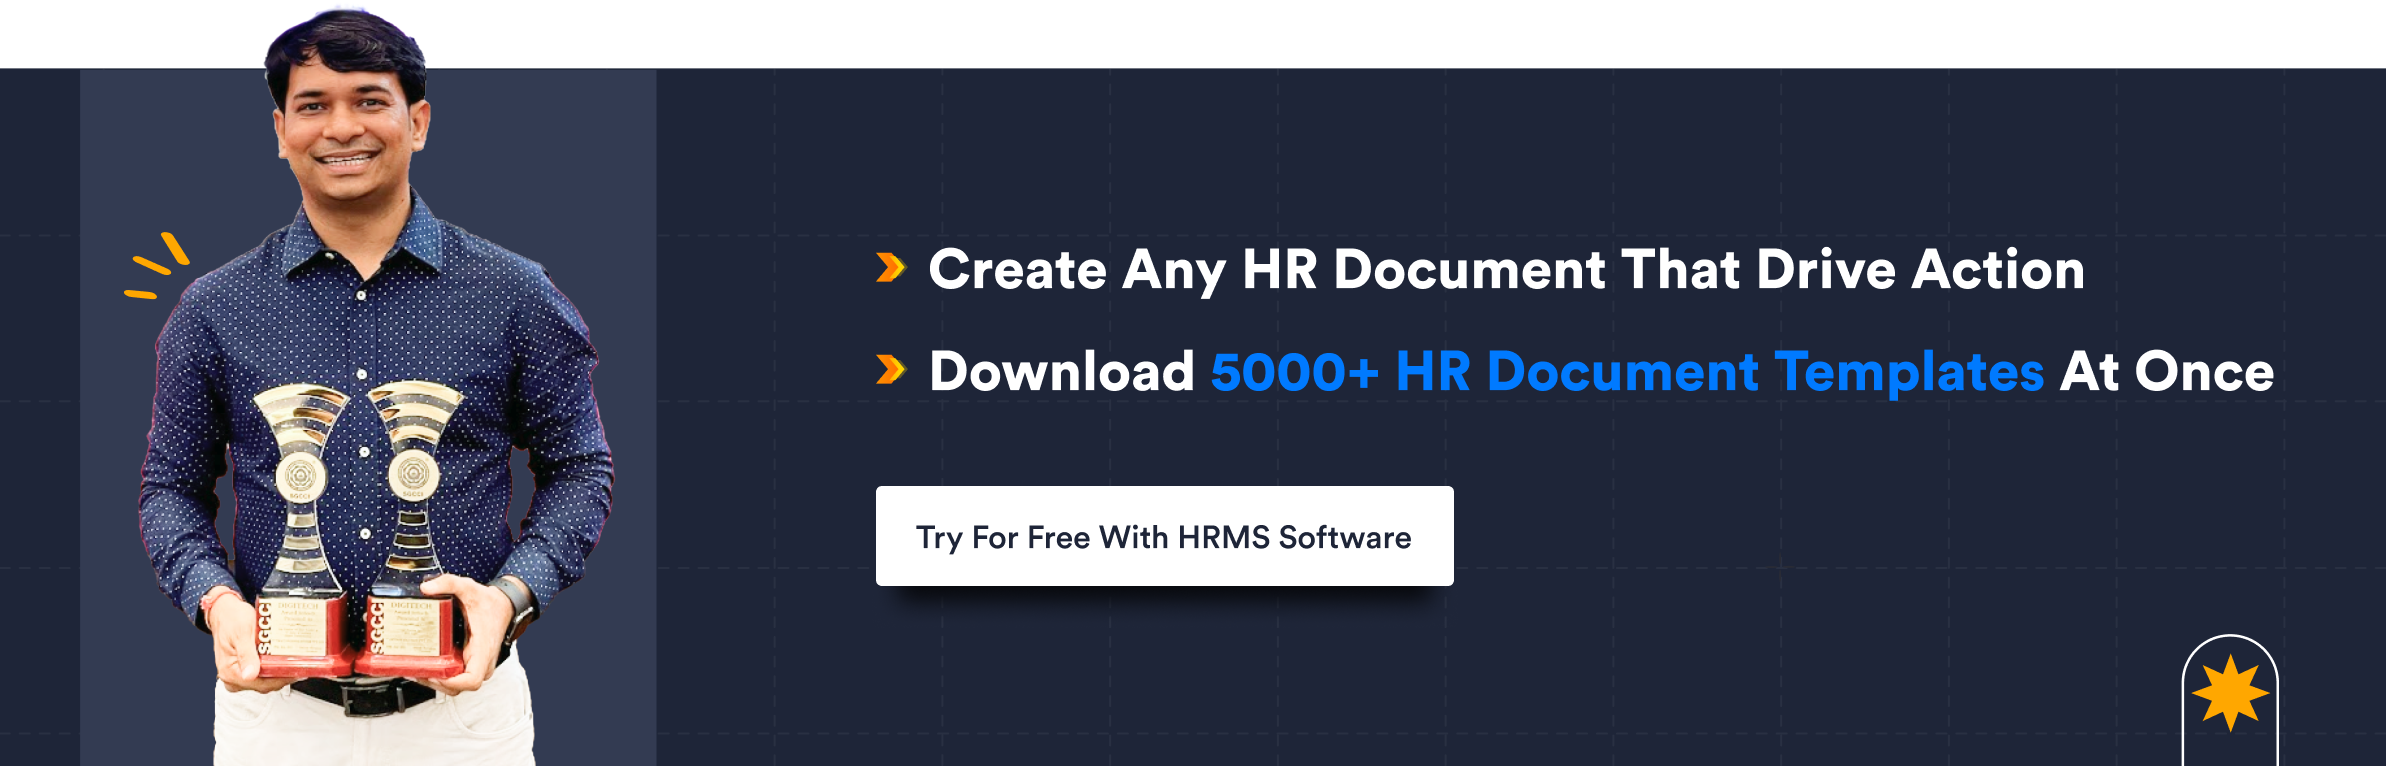 Create Any HR Document That Drive Action 2